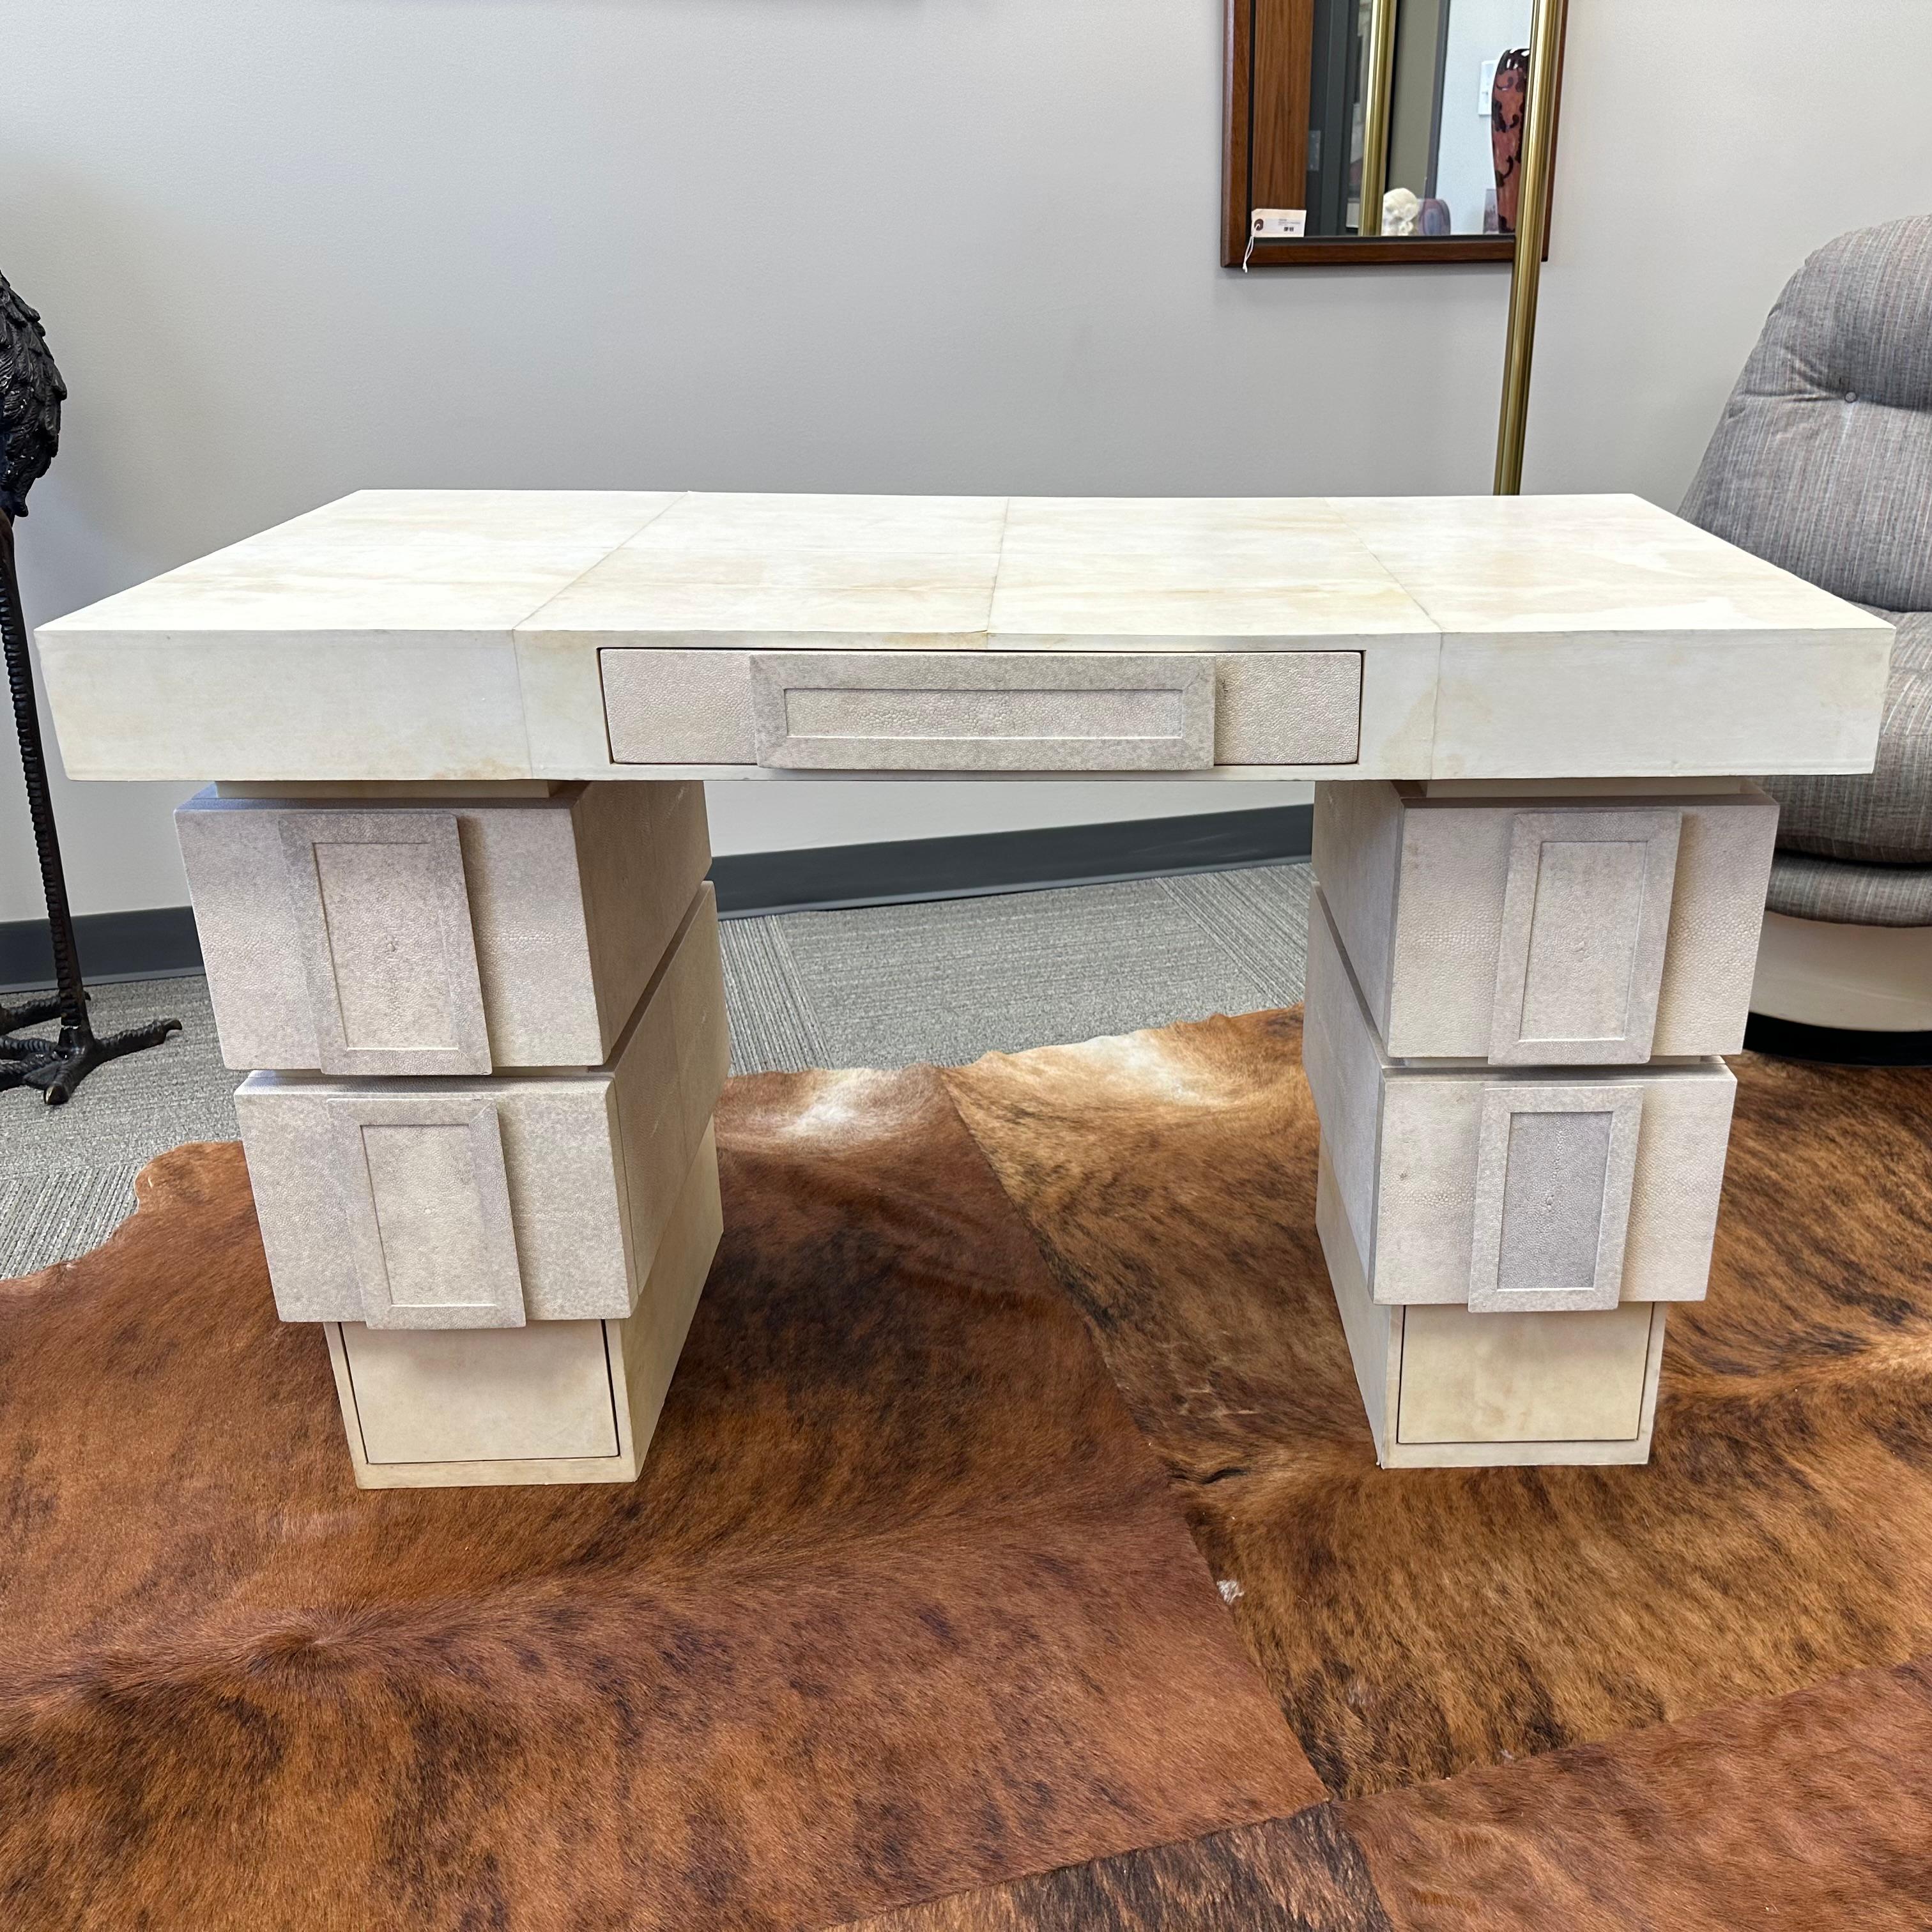 This exceptional desk was designed in the 1990s by husband-and-wife design team Ria and Yiouri Augousti of Paris, France. The surface and base of the desk is finished in parchment, while the rest of the piece is finished in shagreen. The desk is